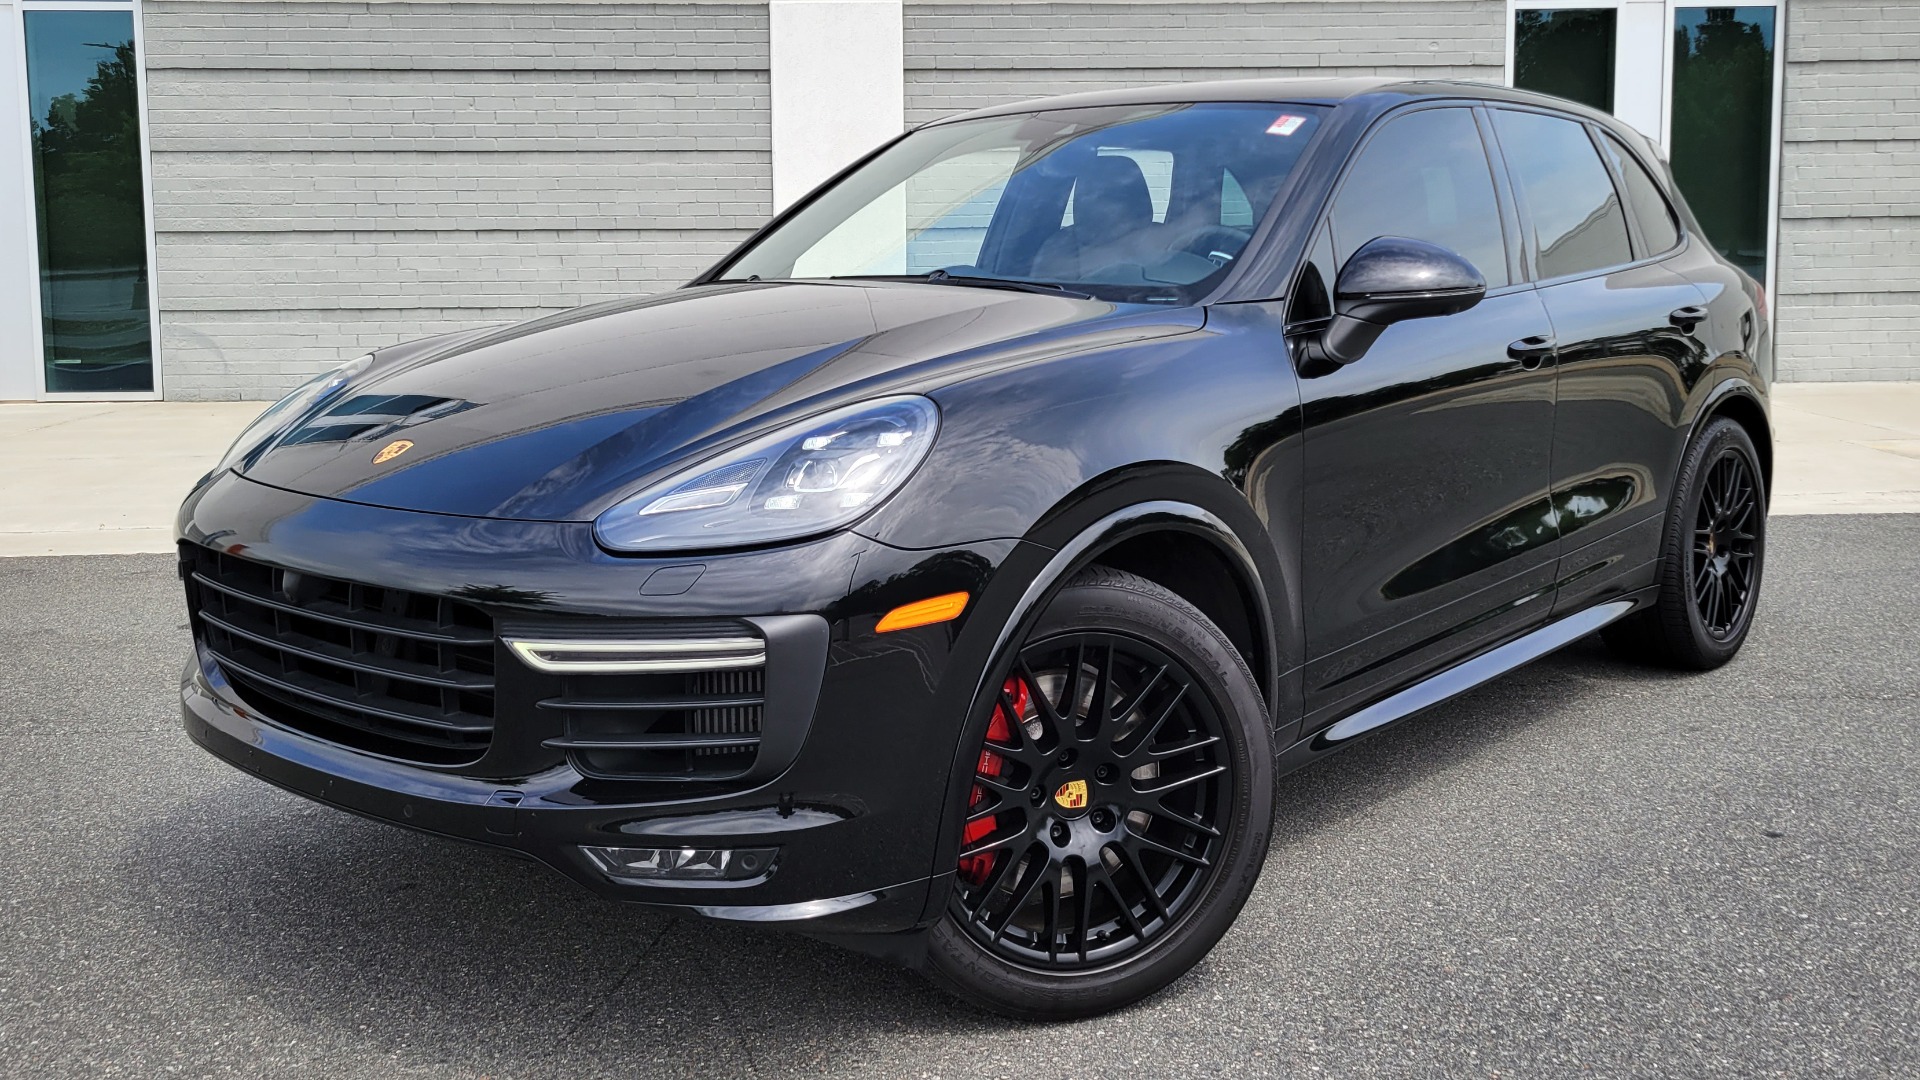 Used 2017 Porsche CAYENNE GTS 3.6L / NAV / SUNROOF / BOSE / PARK ASST / LCA / CAMERA for sale $64,995 at Formula Imports in Charlotte NC 28227 5